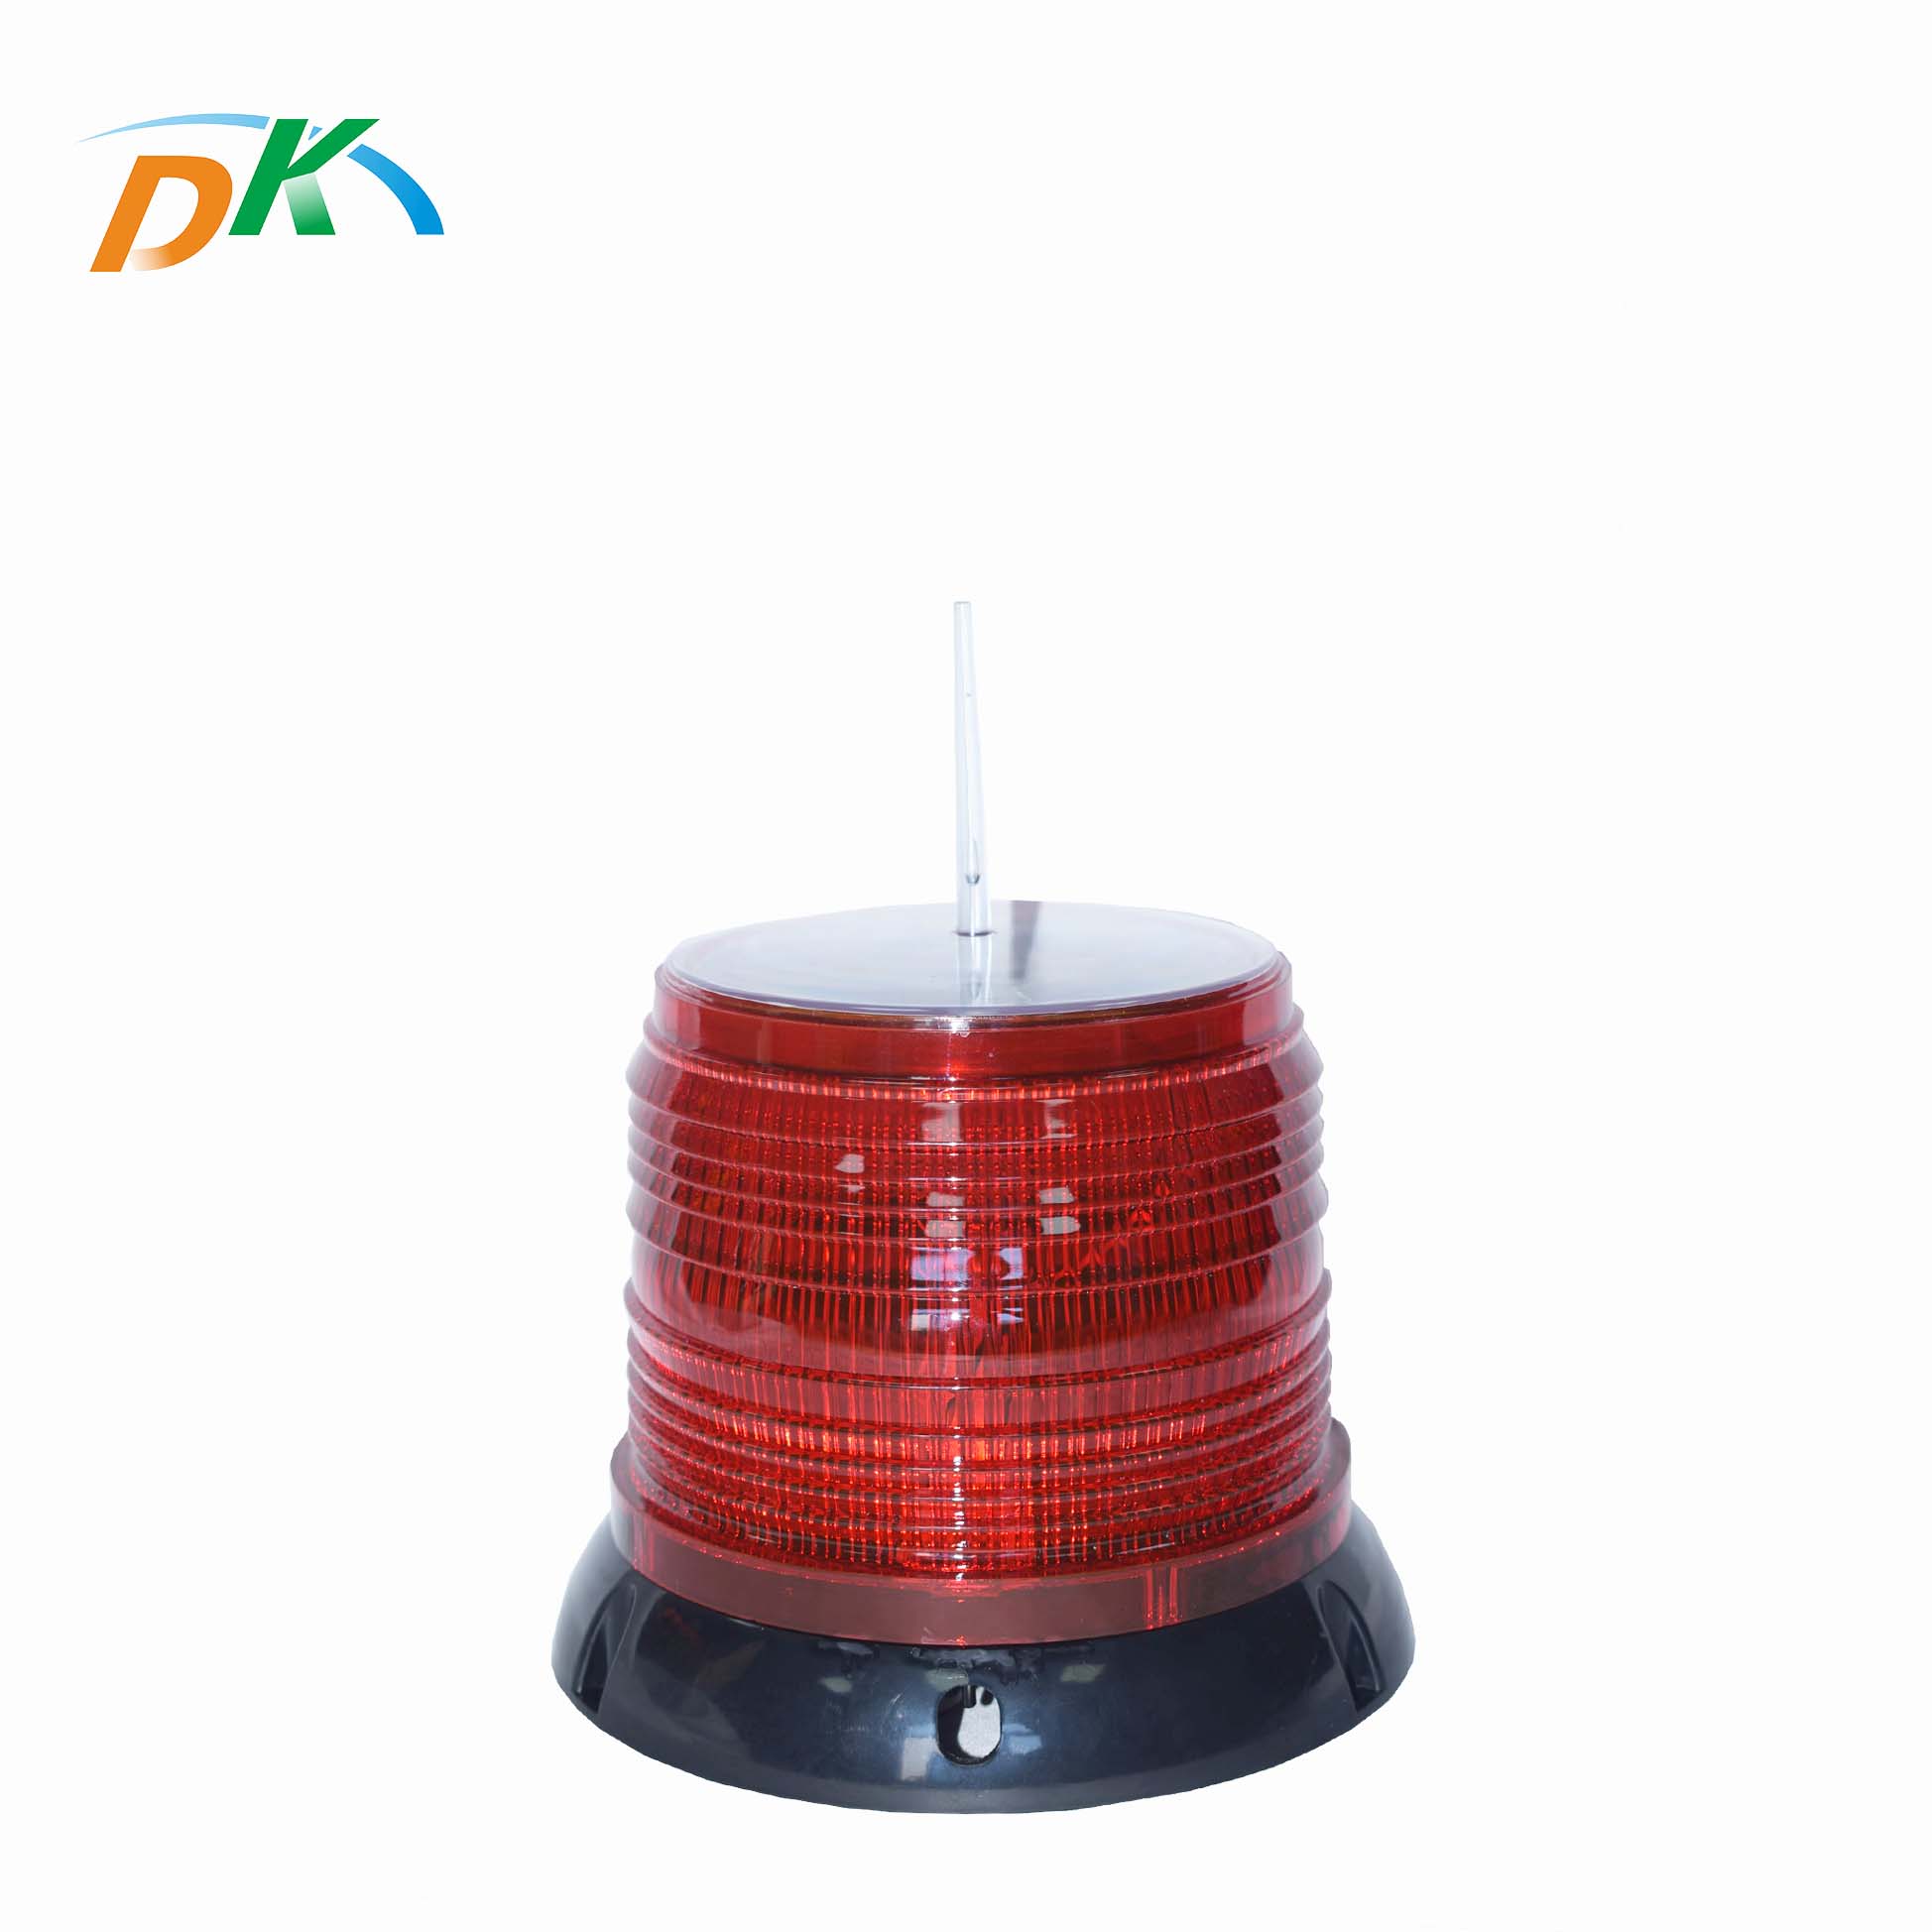 DK LED Solar Powered High Brightness Aviation Flashing Warning Light With 3 strong magnets